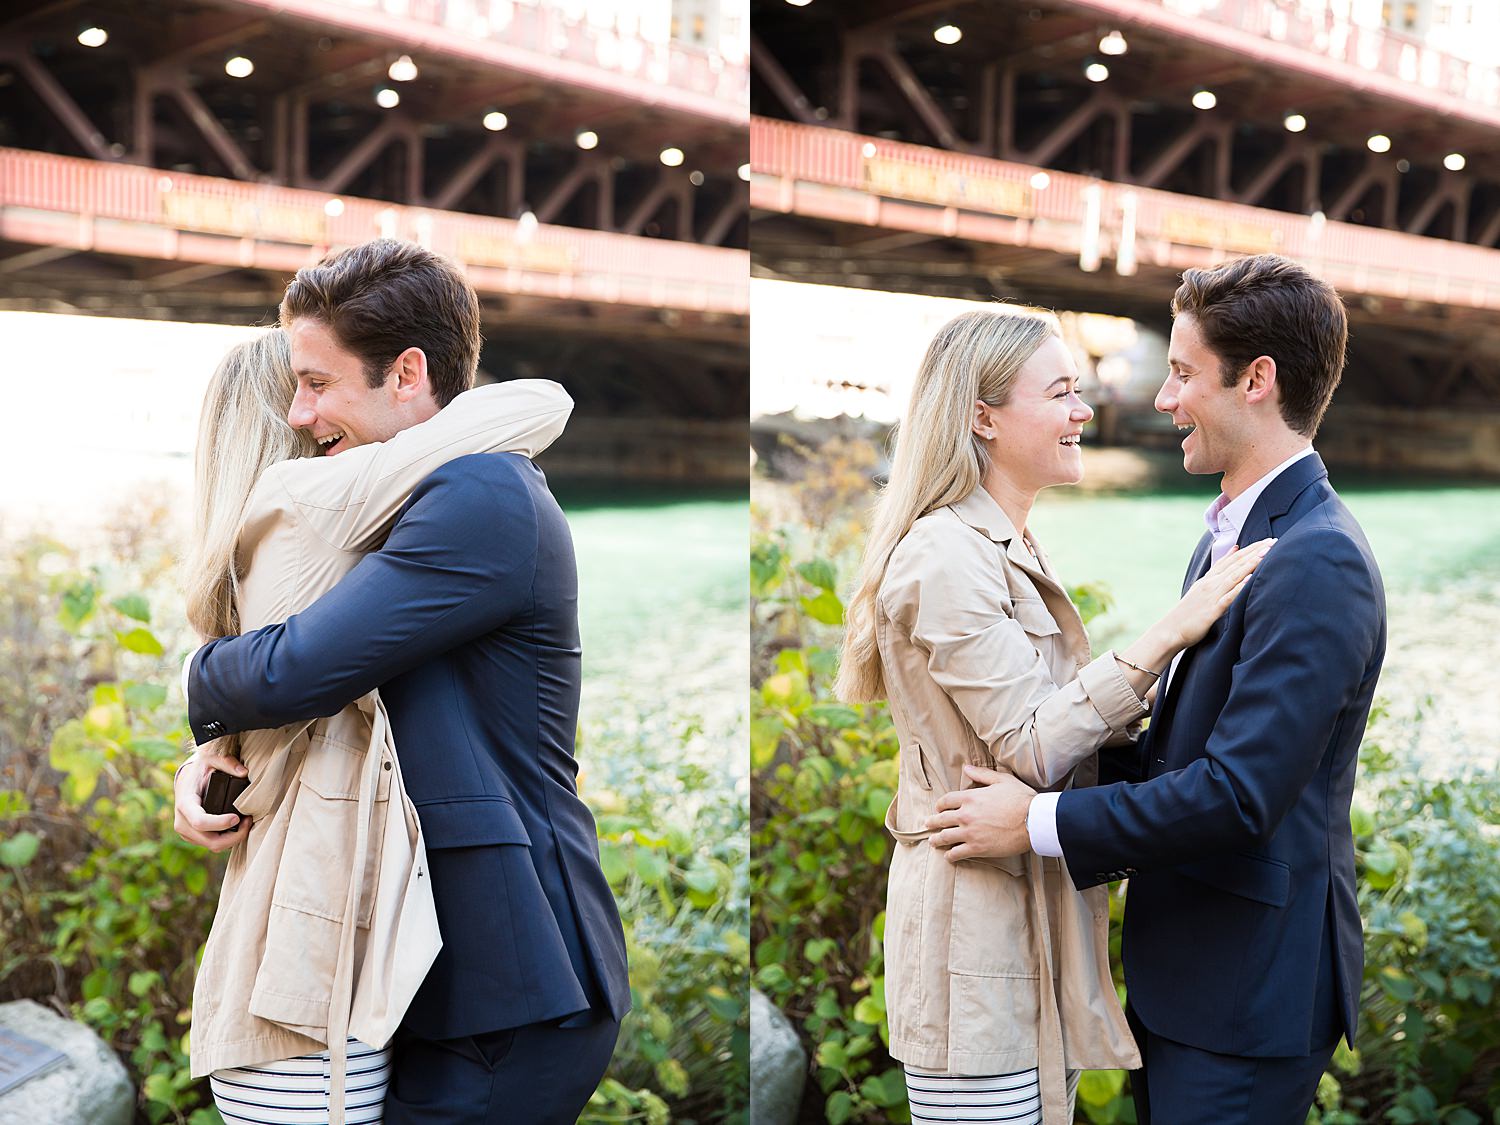 Evan's proposal on Chicago Riverwalk captured by Chicago proposal photographers.